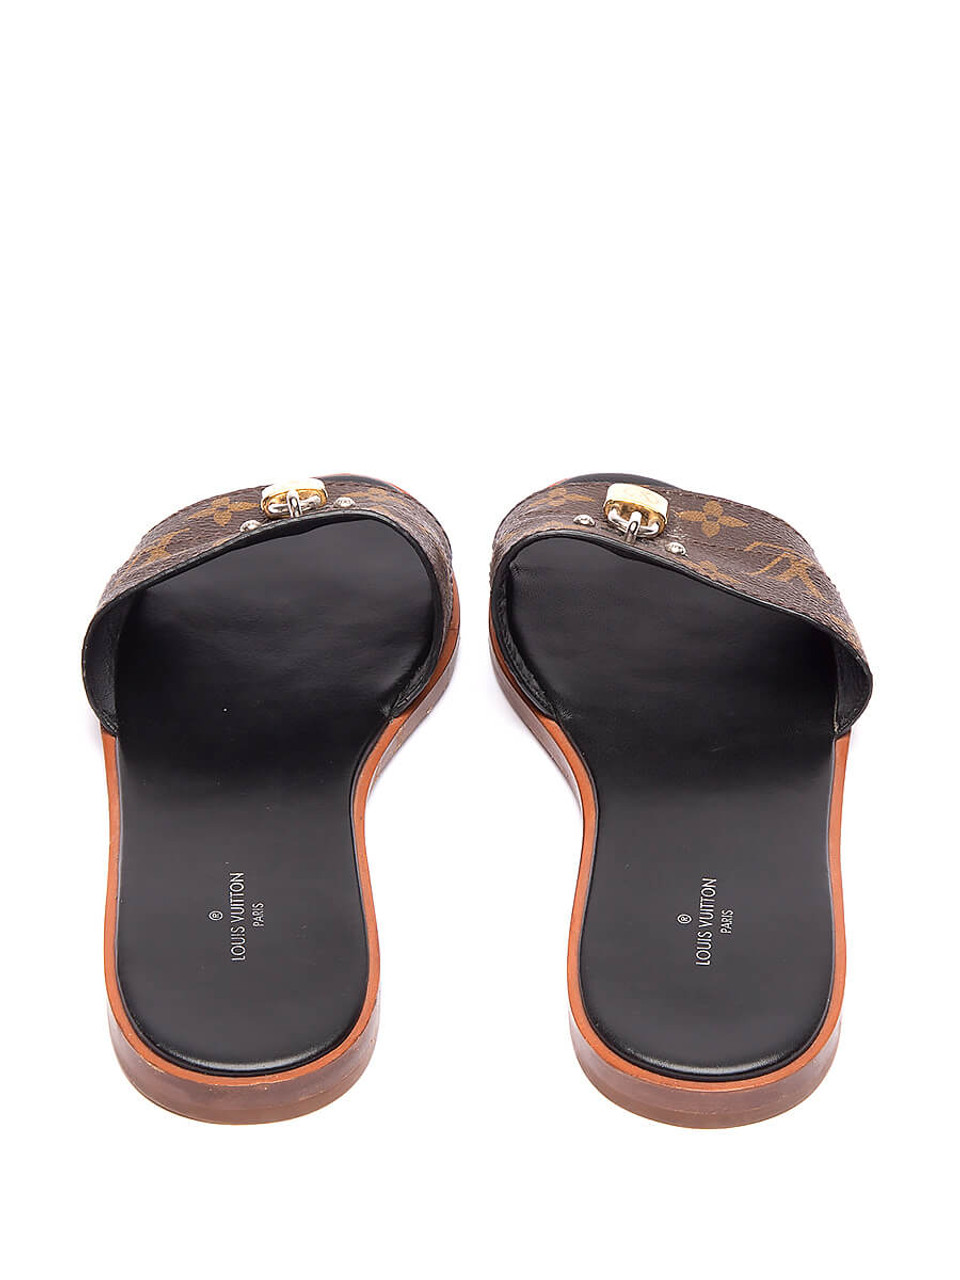 Louis Vuitton - Authenticated Lock It Sandal - Leather Brown for Women, Never Worn